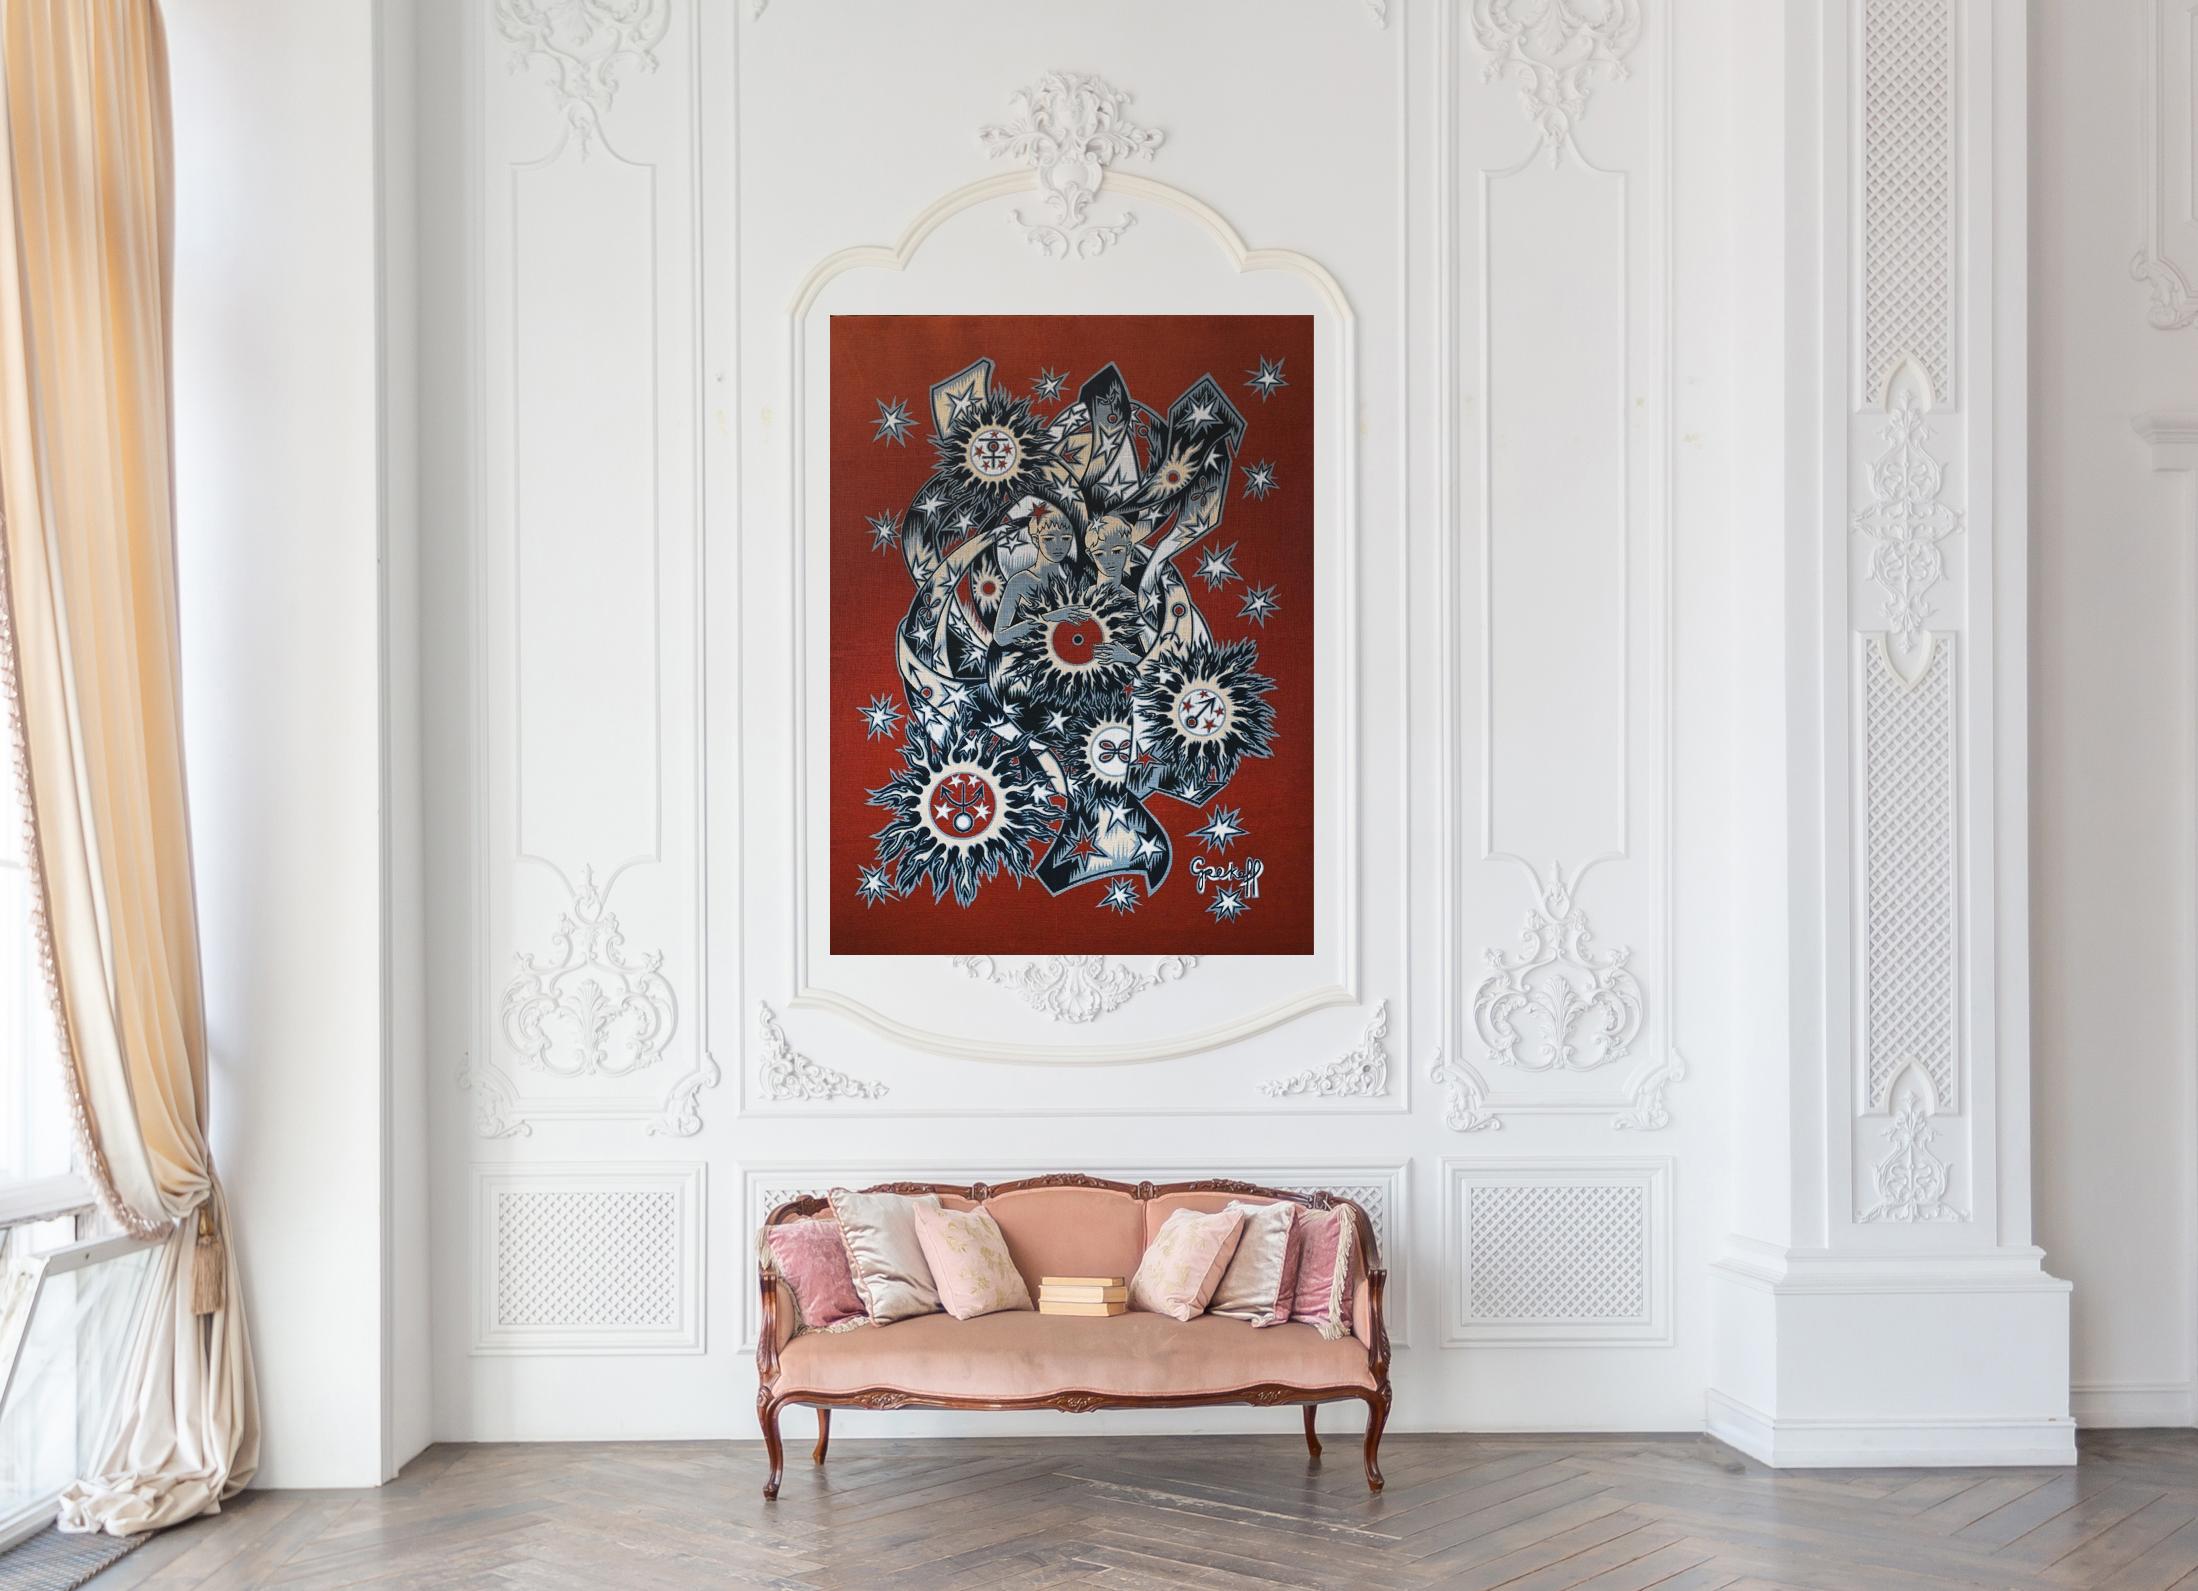 This French hand-printed cartoon tapestry by Elie Grekoff, signed, “Les Gemeaux.” Measures: (4.4 x 3.4 ft).

Chaos and control. A found principle in a rare dychomety of interior art. Elie Grekoff depicts the gemini dichotomy with reverence and